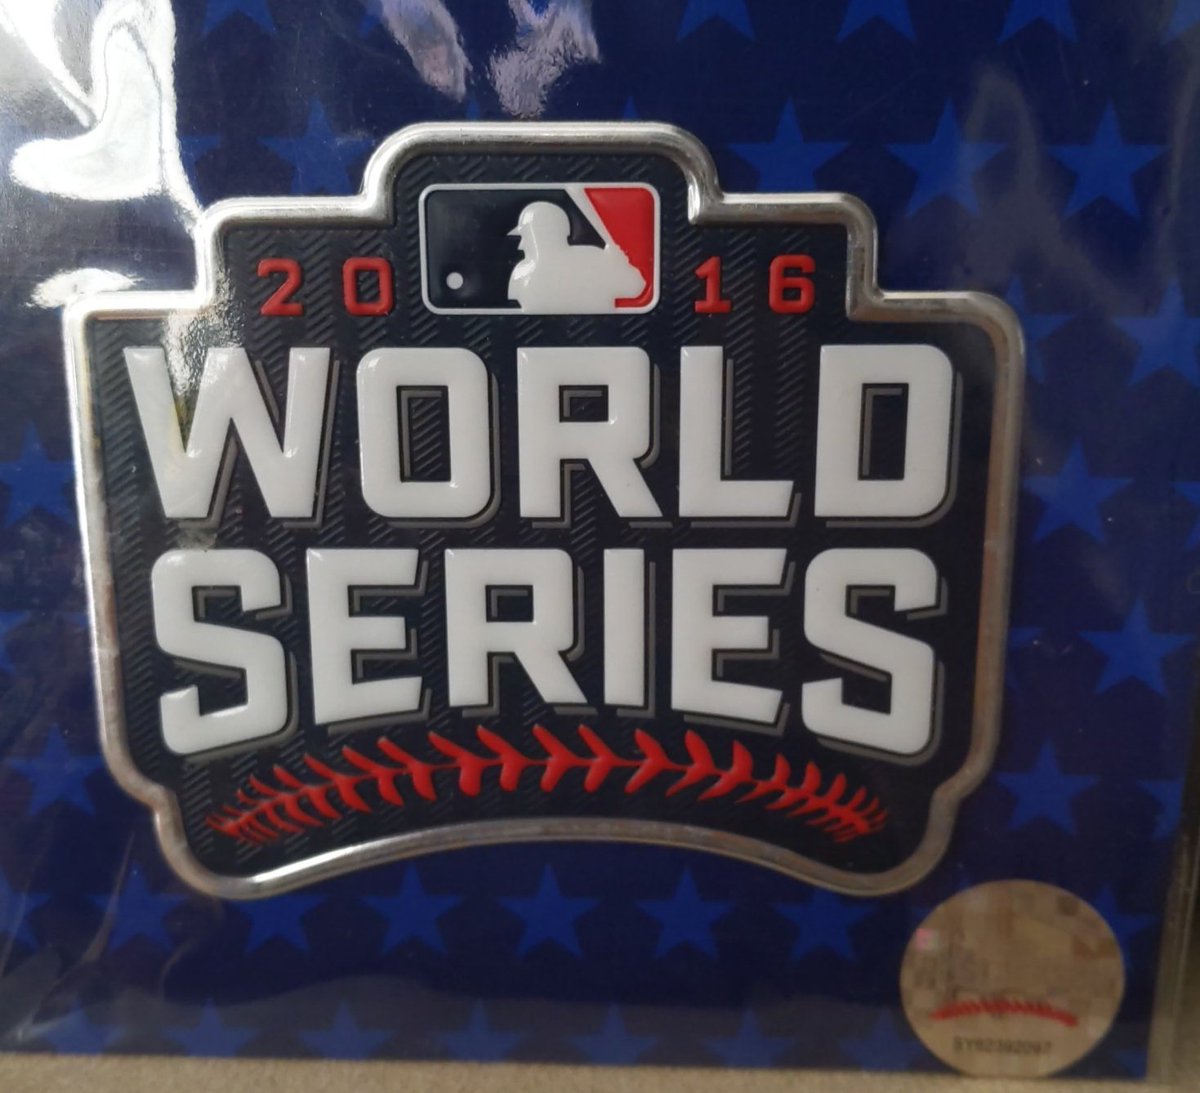 Official 2016 World Series patch from Cubs World Series winning season. Still in packaging never taken out. Would greatly appreciate any RT. Everything in this thread is for sale. DM me for prices..  #Cubs  @cubs  @WatchTheBreaks  @crawlyscubs  @BarstoolBigCat  @NBCSCubs  @ChiefCub